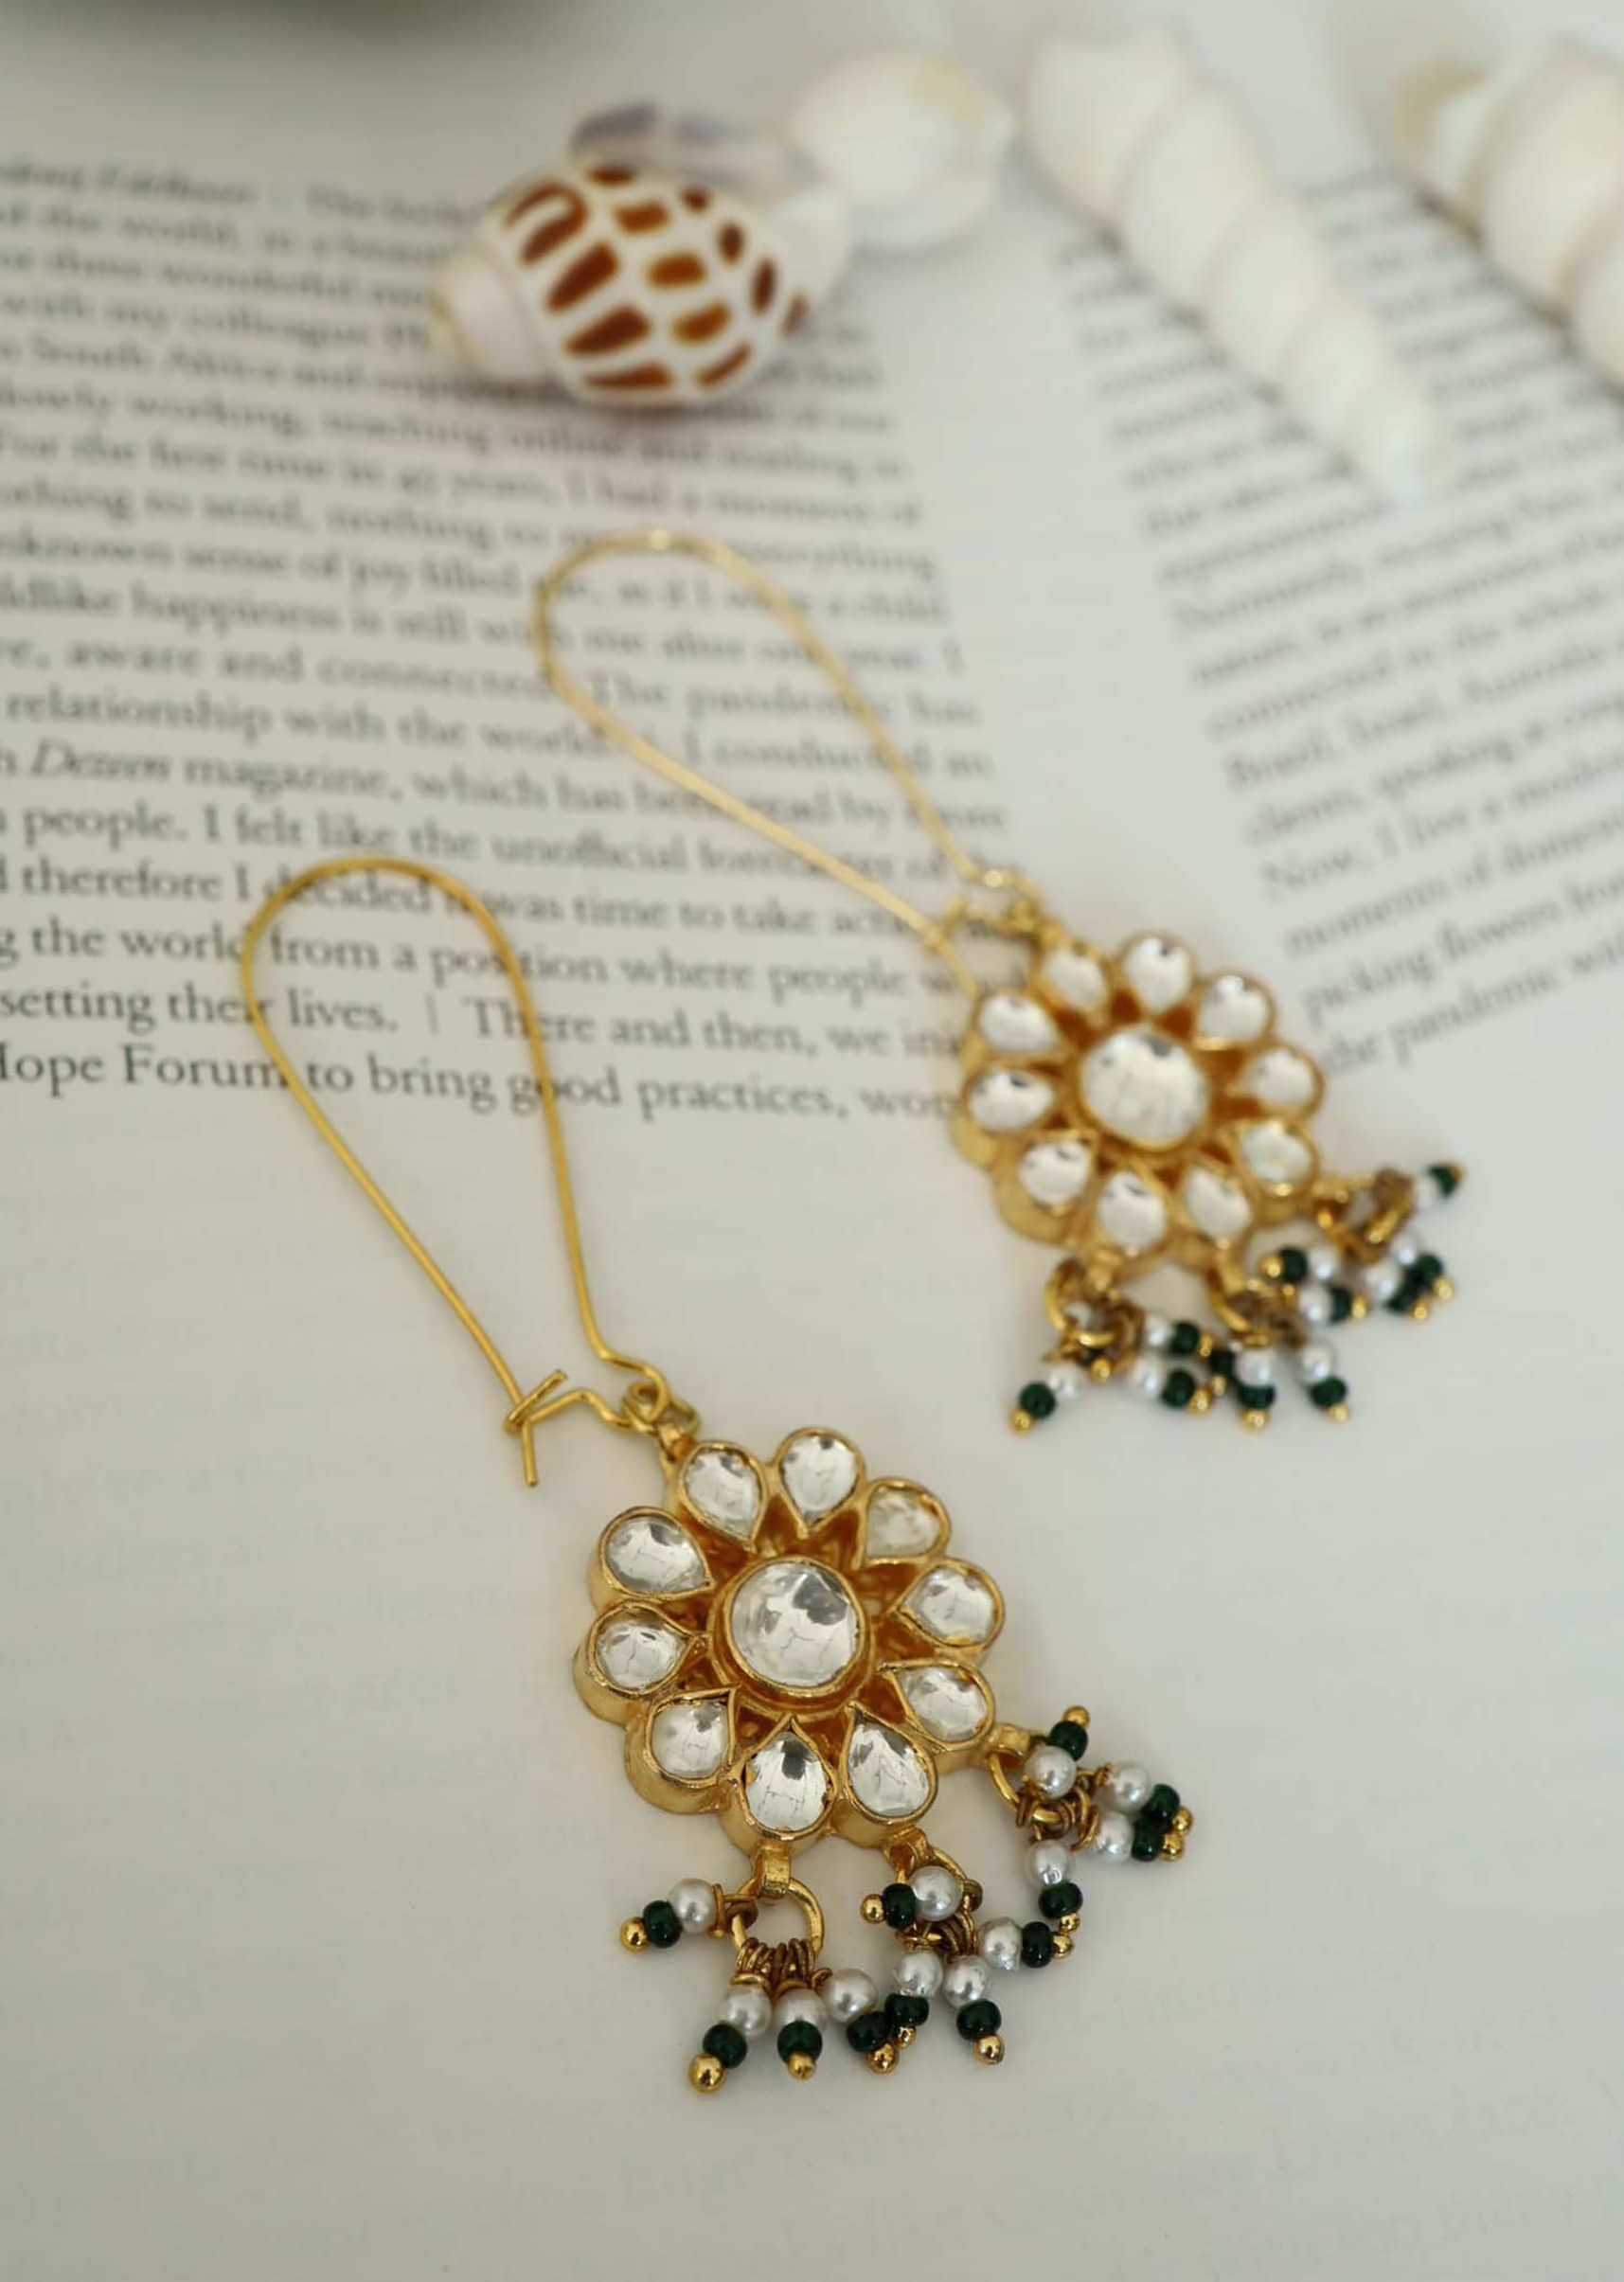 Gold Earrings In A Dainty Floral Design With Kundan Work And Pearl Trinkets